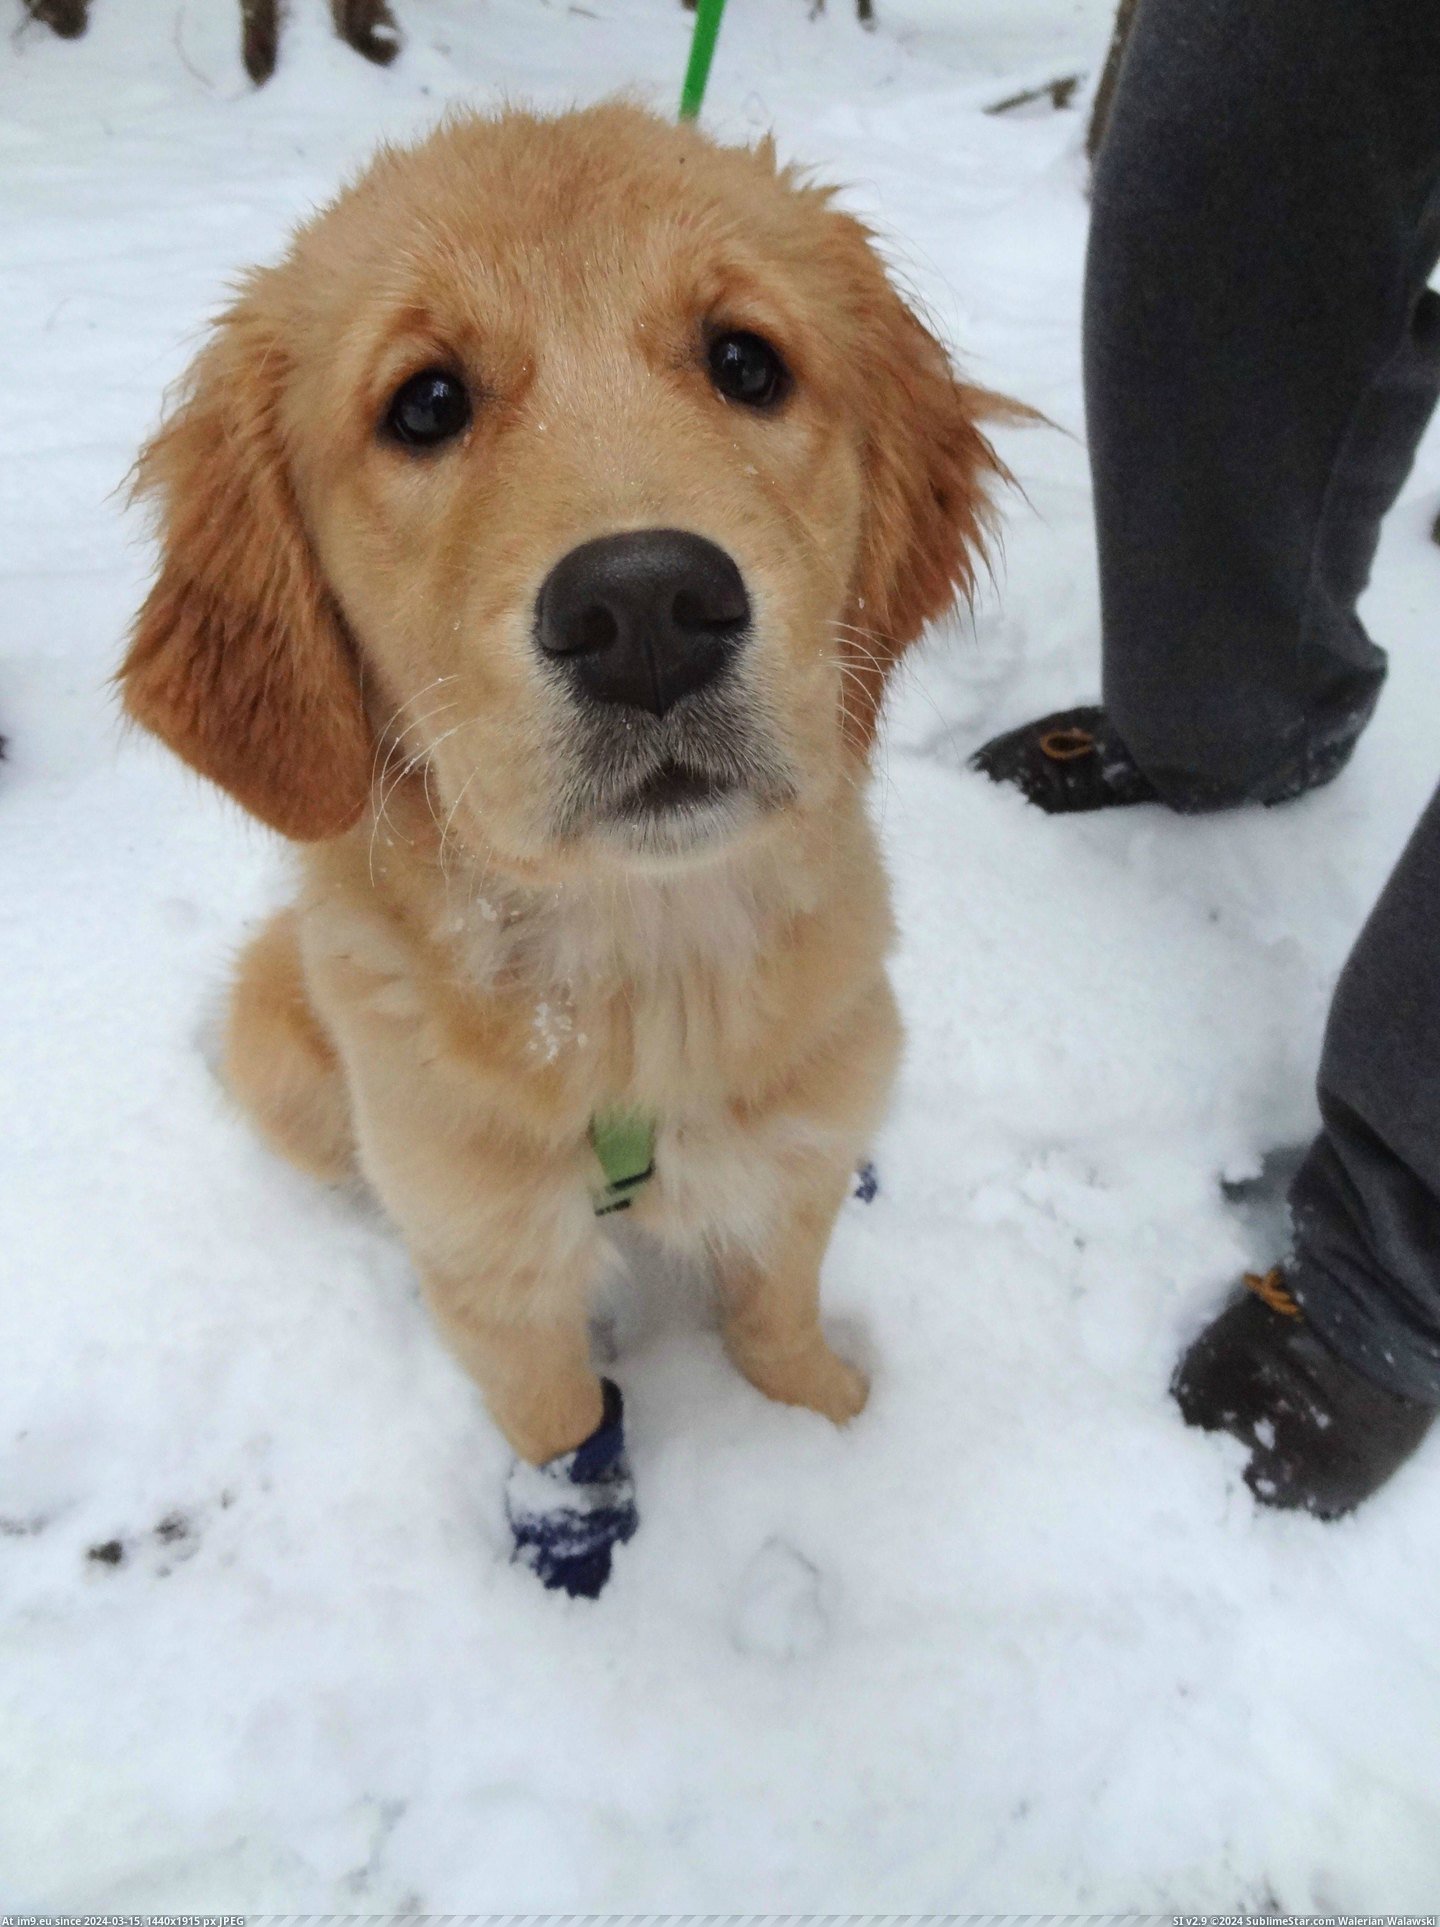 #One #Old #Eyes #Golden #Month #Walk #Booties #Snow #Our #Lost [Aww] My four-month-old Golden lost one of her booties on our walk in the snow. Those eyes! Pic. (Image of album My r/AWW favs))